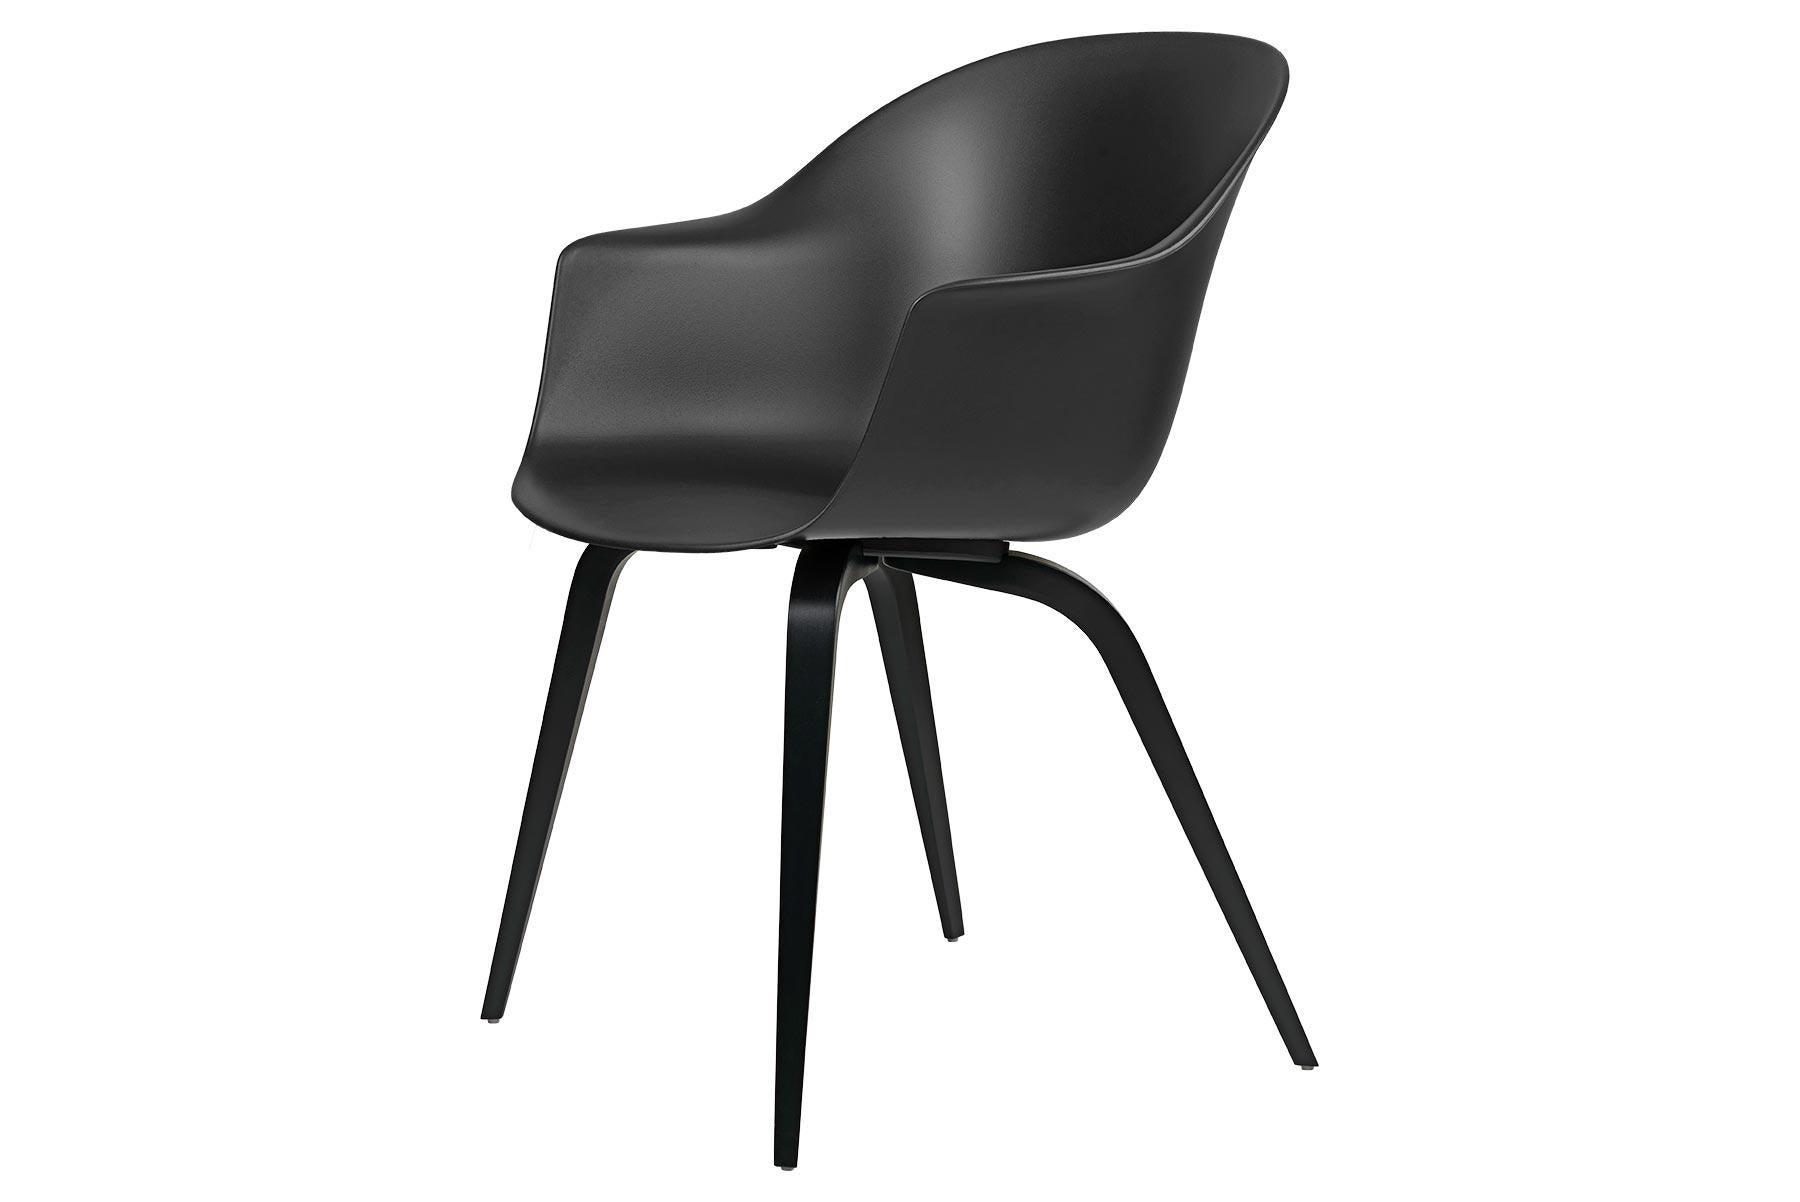 The Bat dining chair, designed by Danish-Italian design-duo GamFratesi, carries strong references to the interesting characteristics of bats, with its inviting, distinctive shell reminiscent of the shape of a bat’s wingspan. Balancing between the